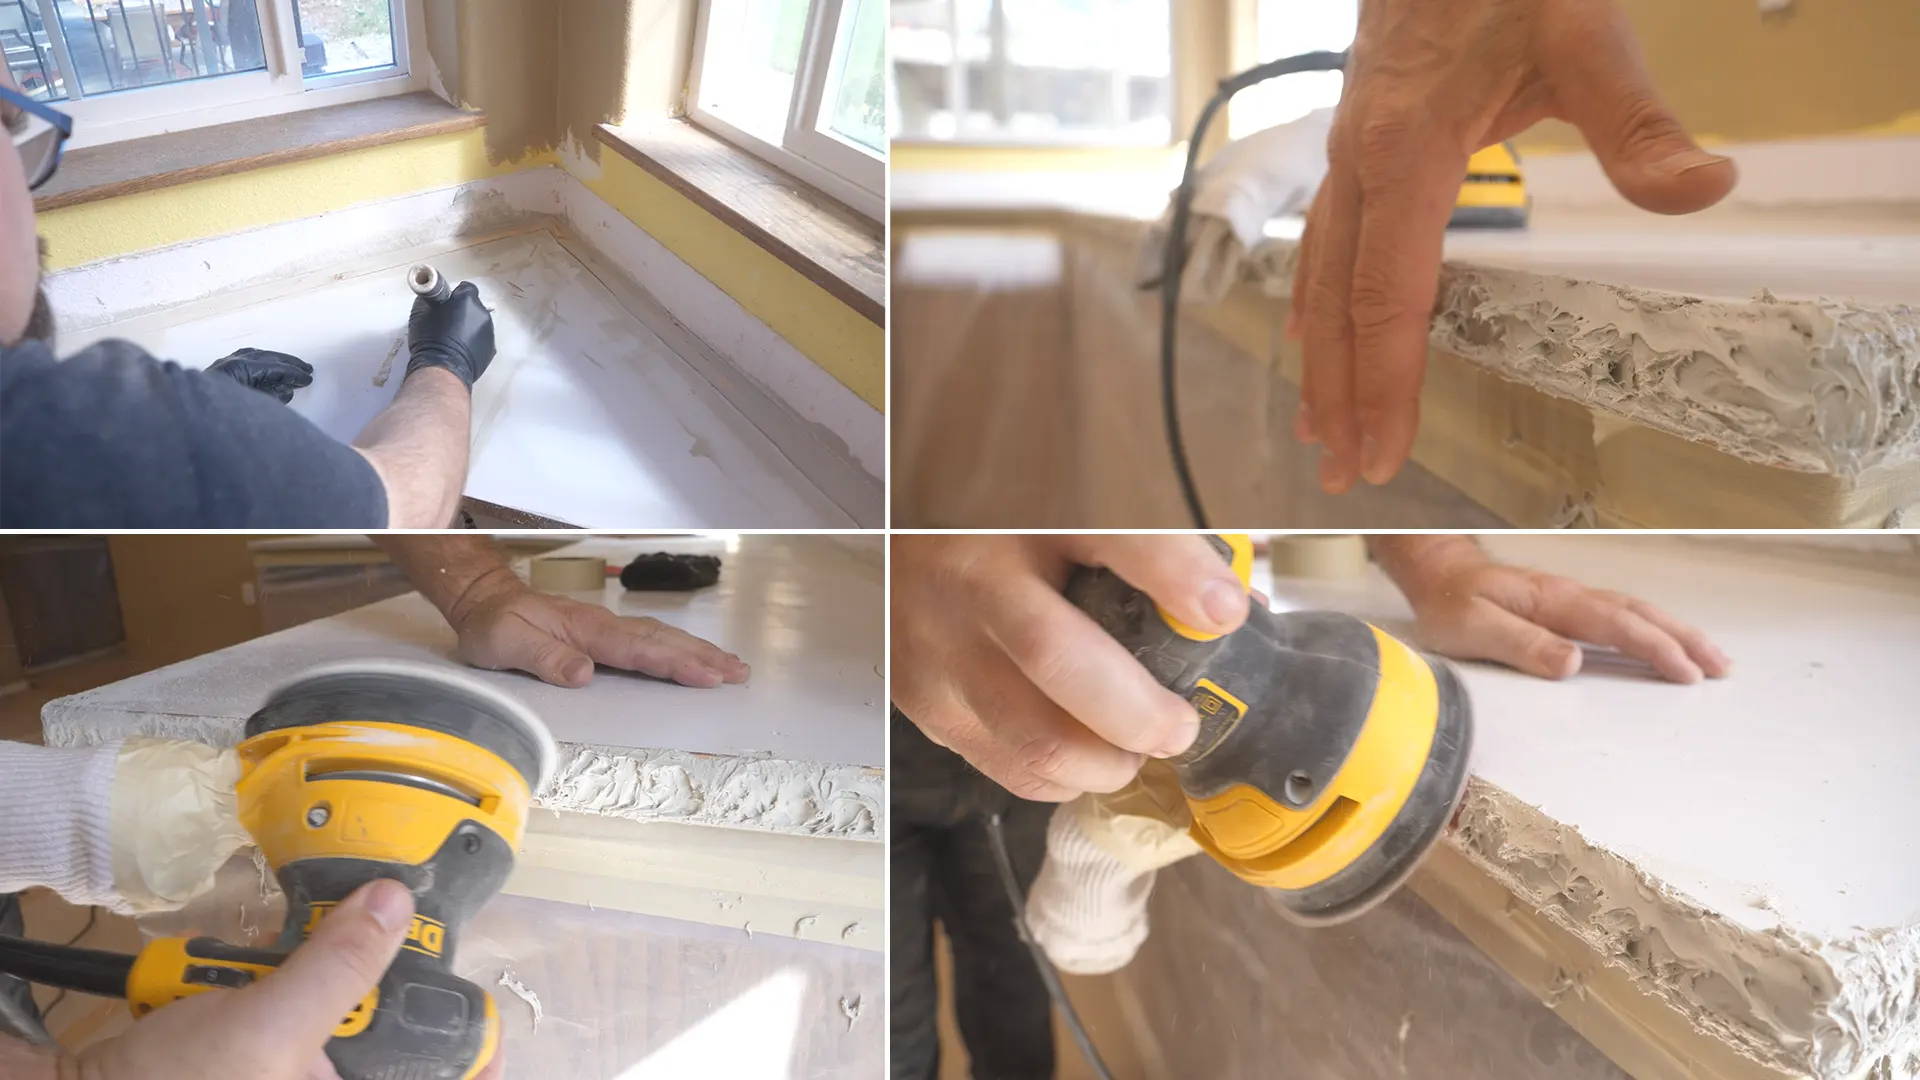 Orbital sander smoothing the rock face edge for a touchable smooth yet textured surface.